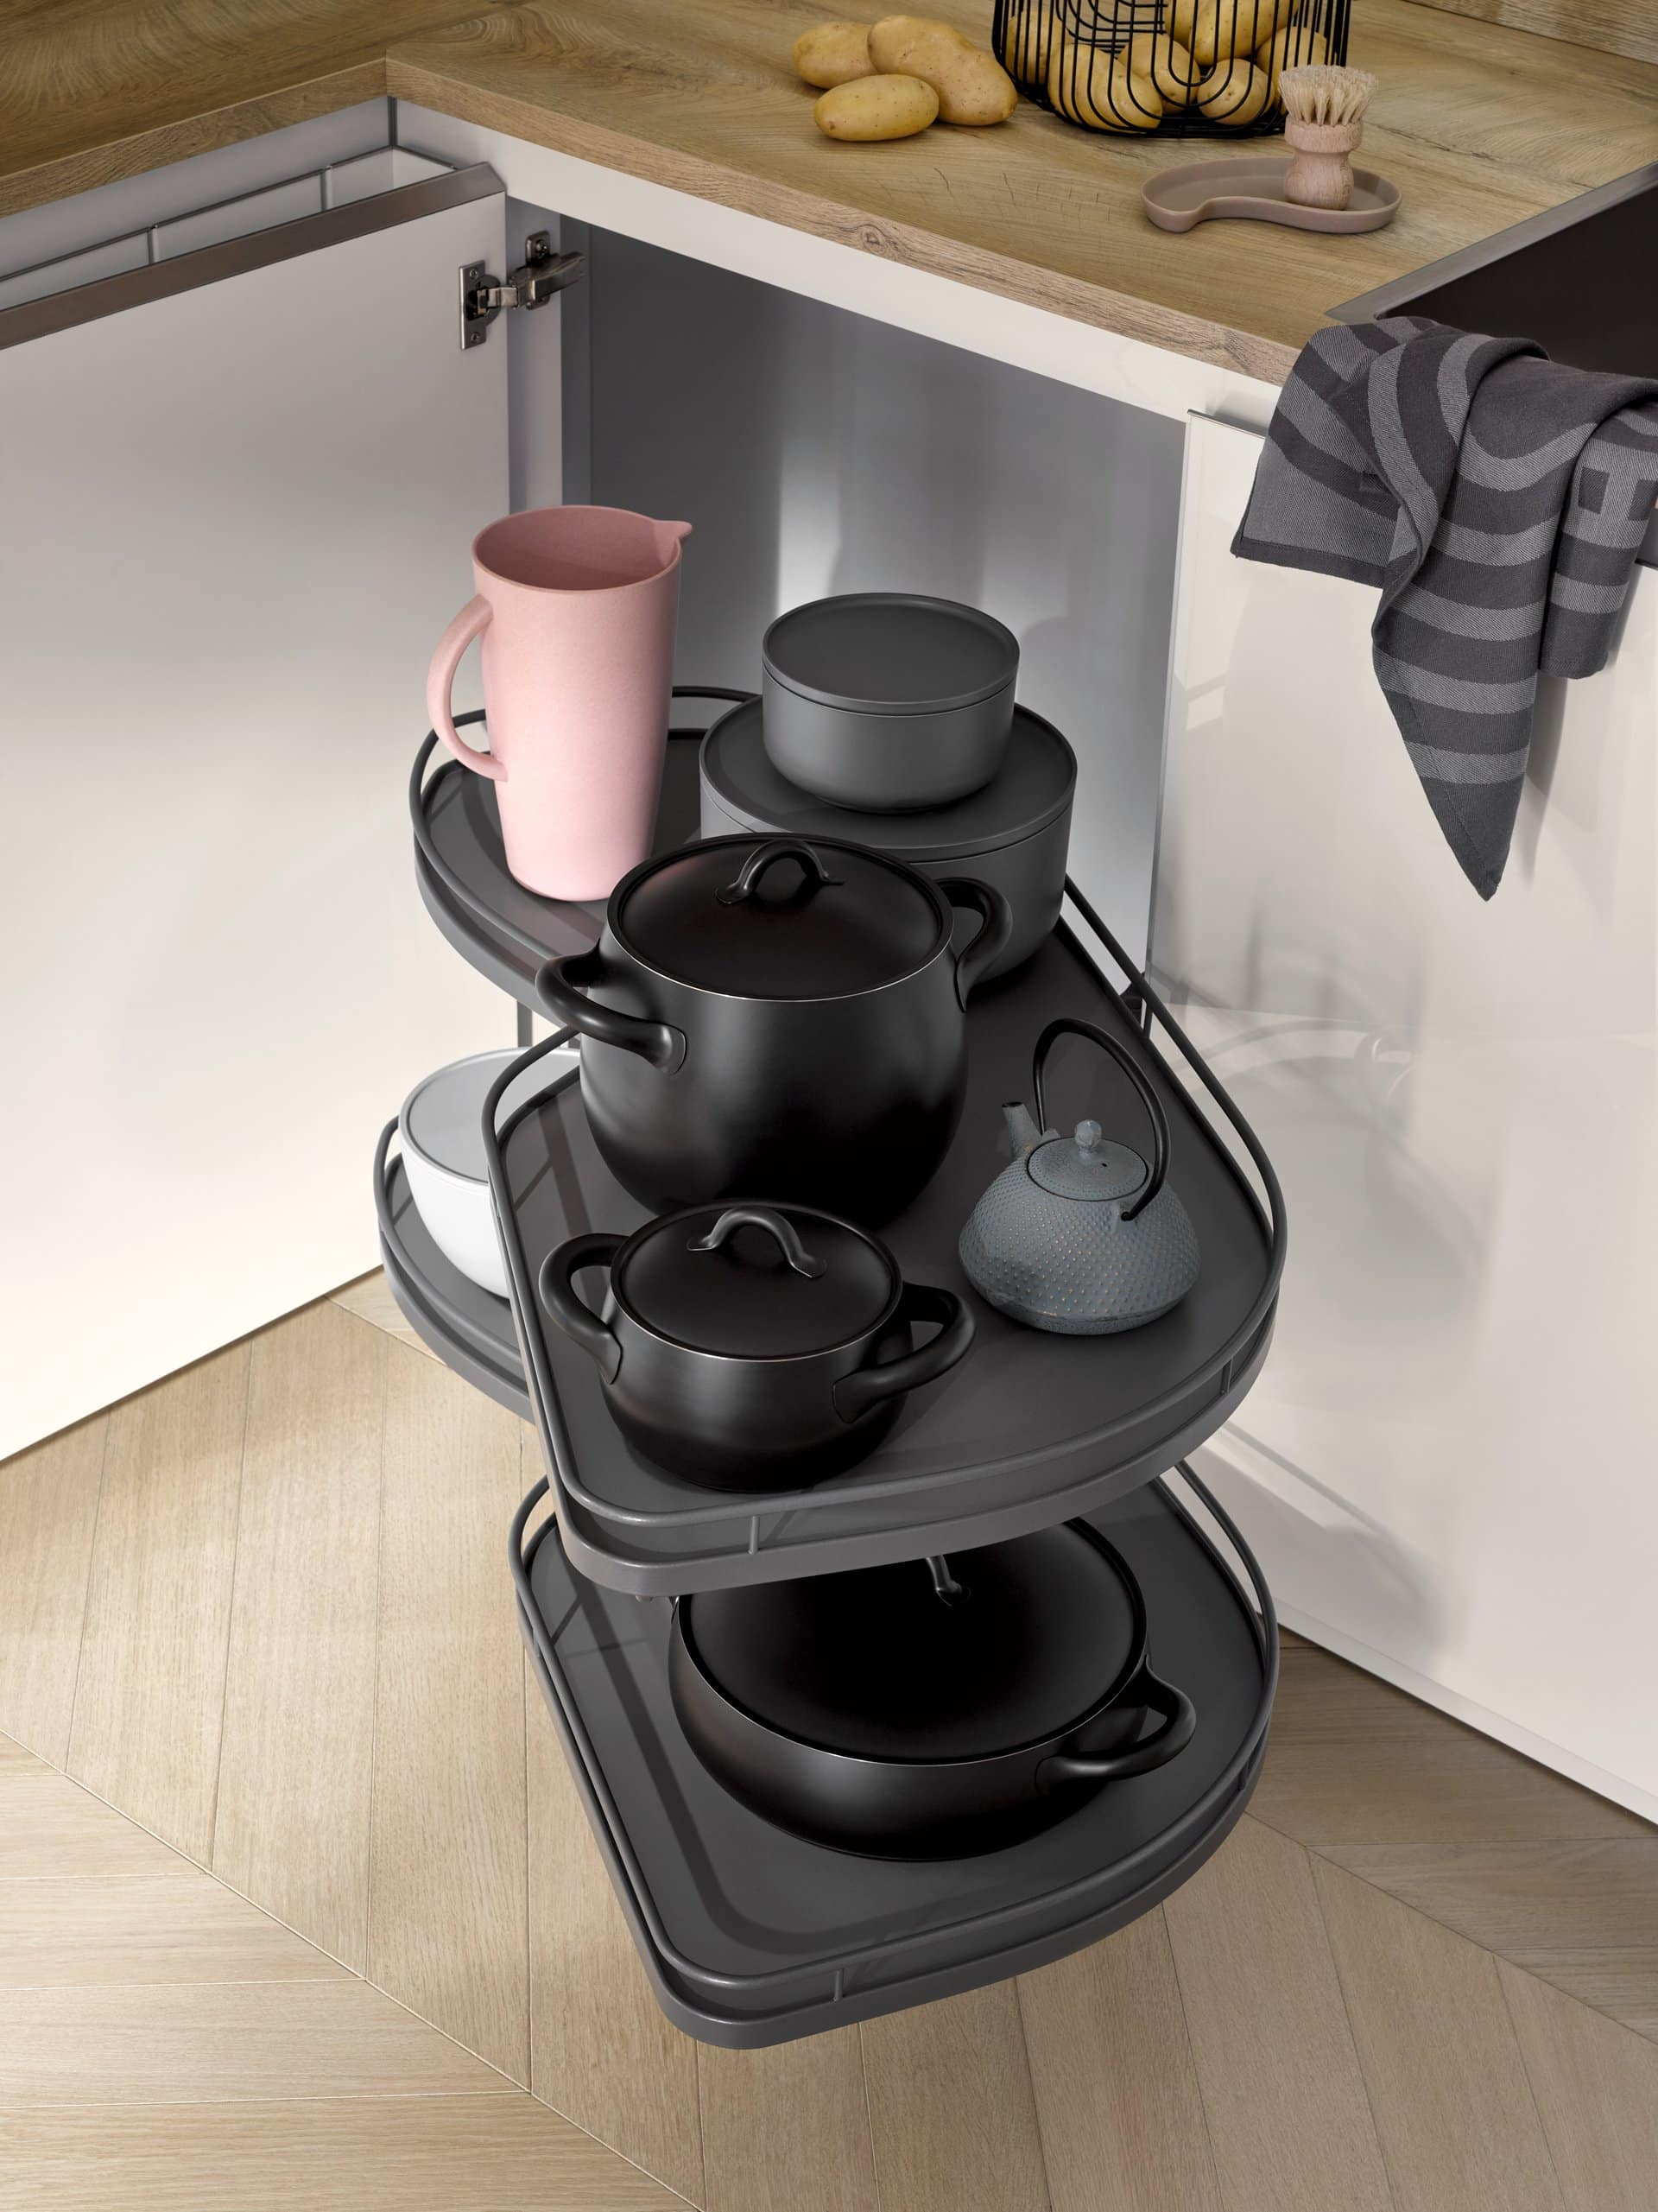 Pull-out corner shelf inside a kitchen cabinet, displaying various black pots, a teapot, bowls, and a pink pitcher. A striped towel hangs over the countertop edge. This space-saving kitchen furniture maximizes storage while keeping essentials within easy reach.